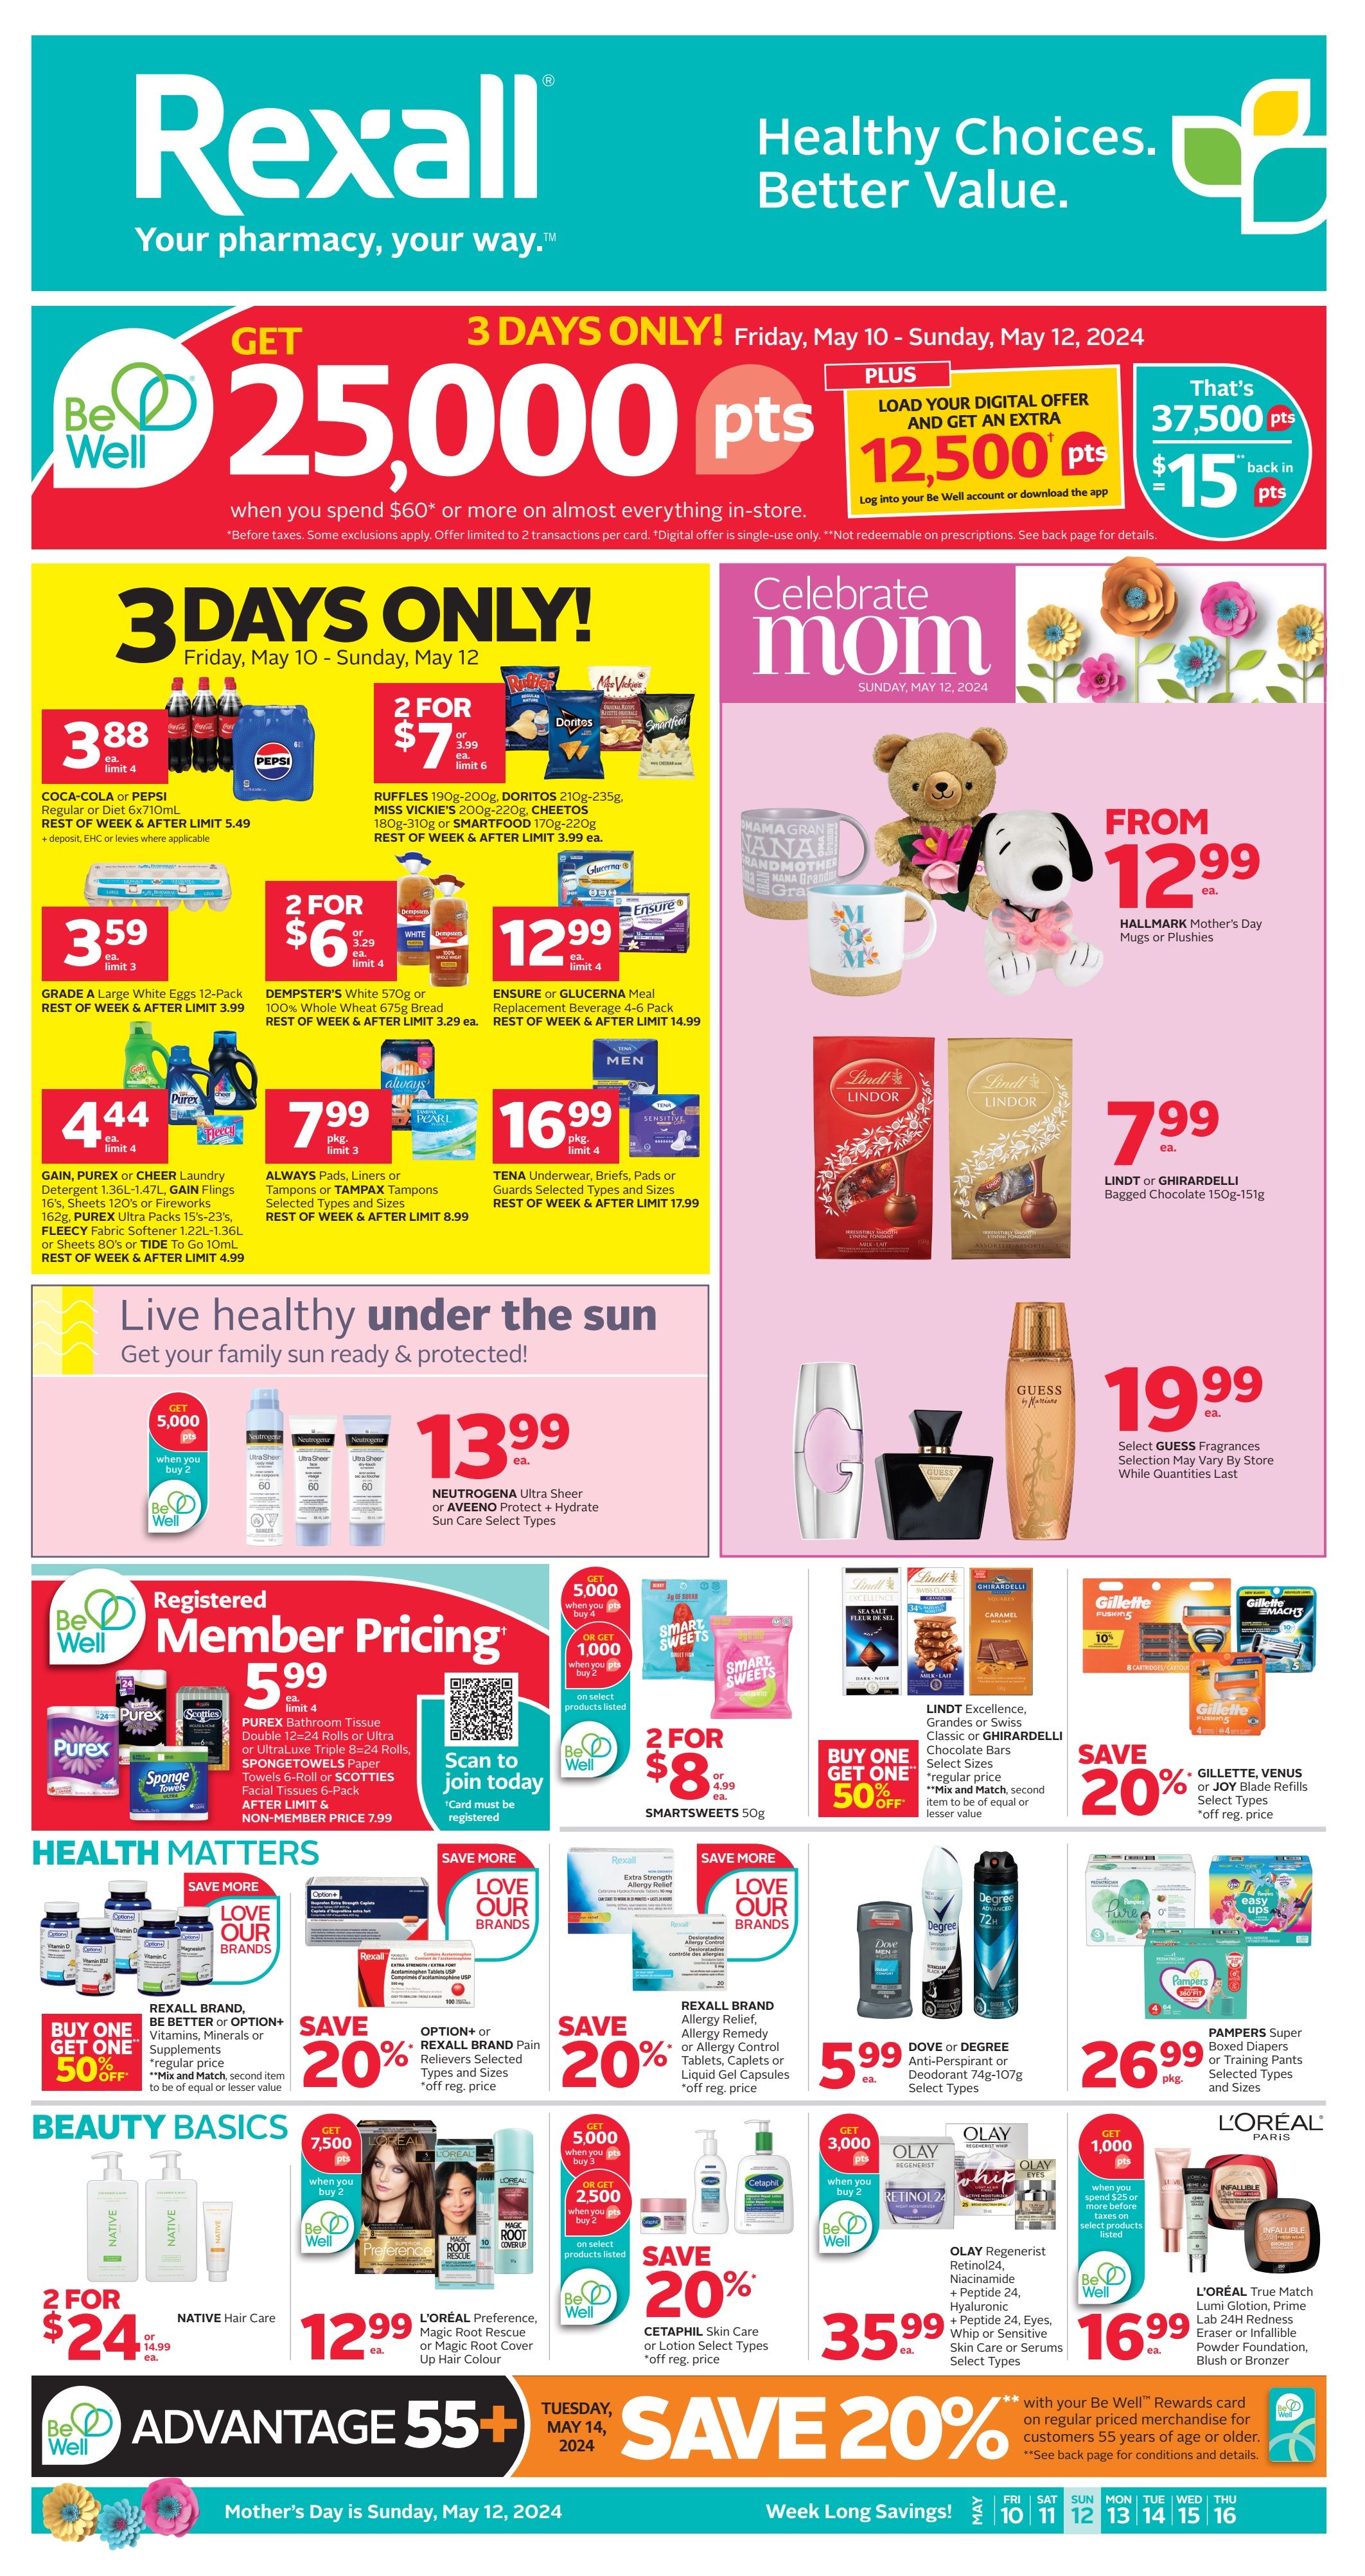 Rexall - British Columbia - Weekly Flyer Specials